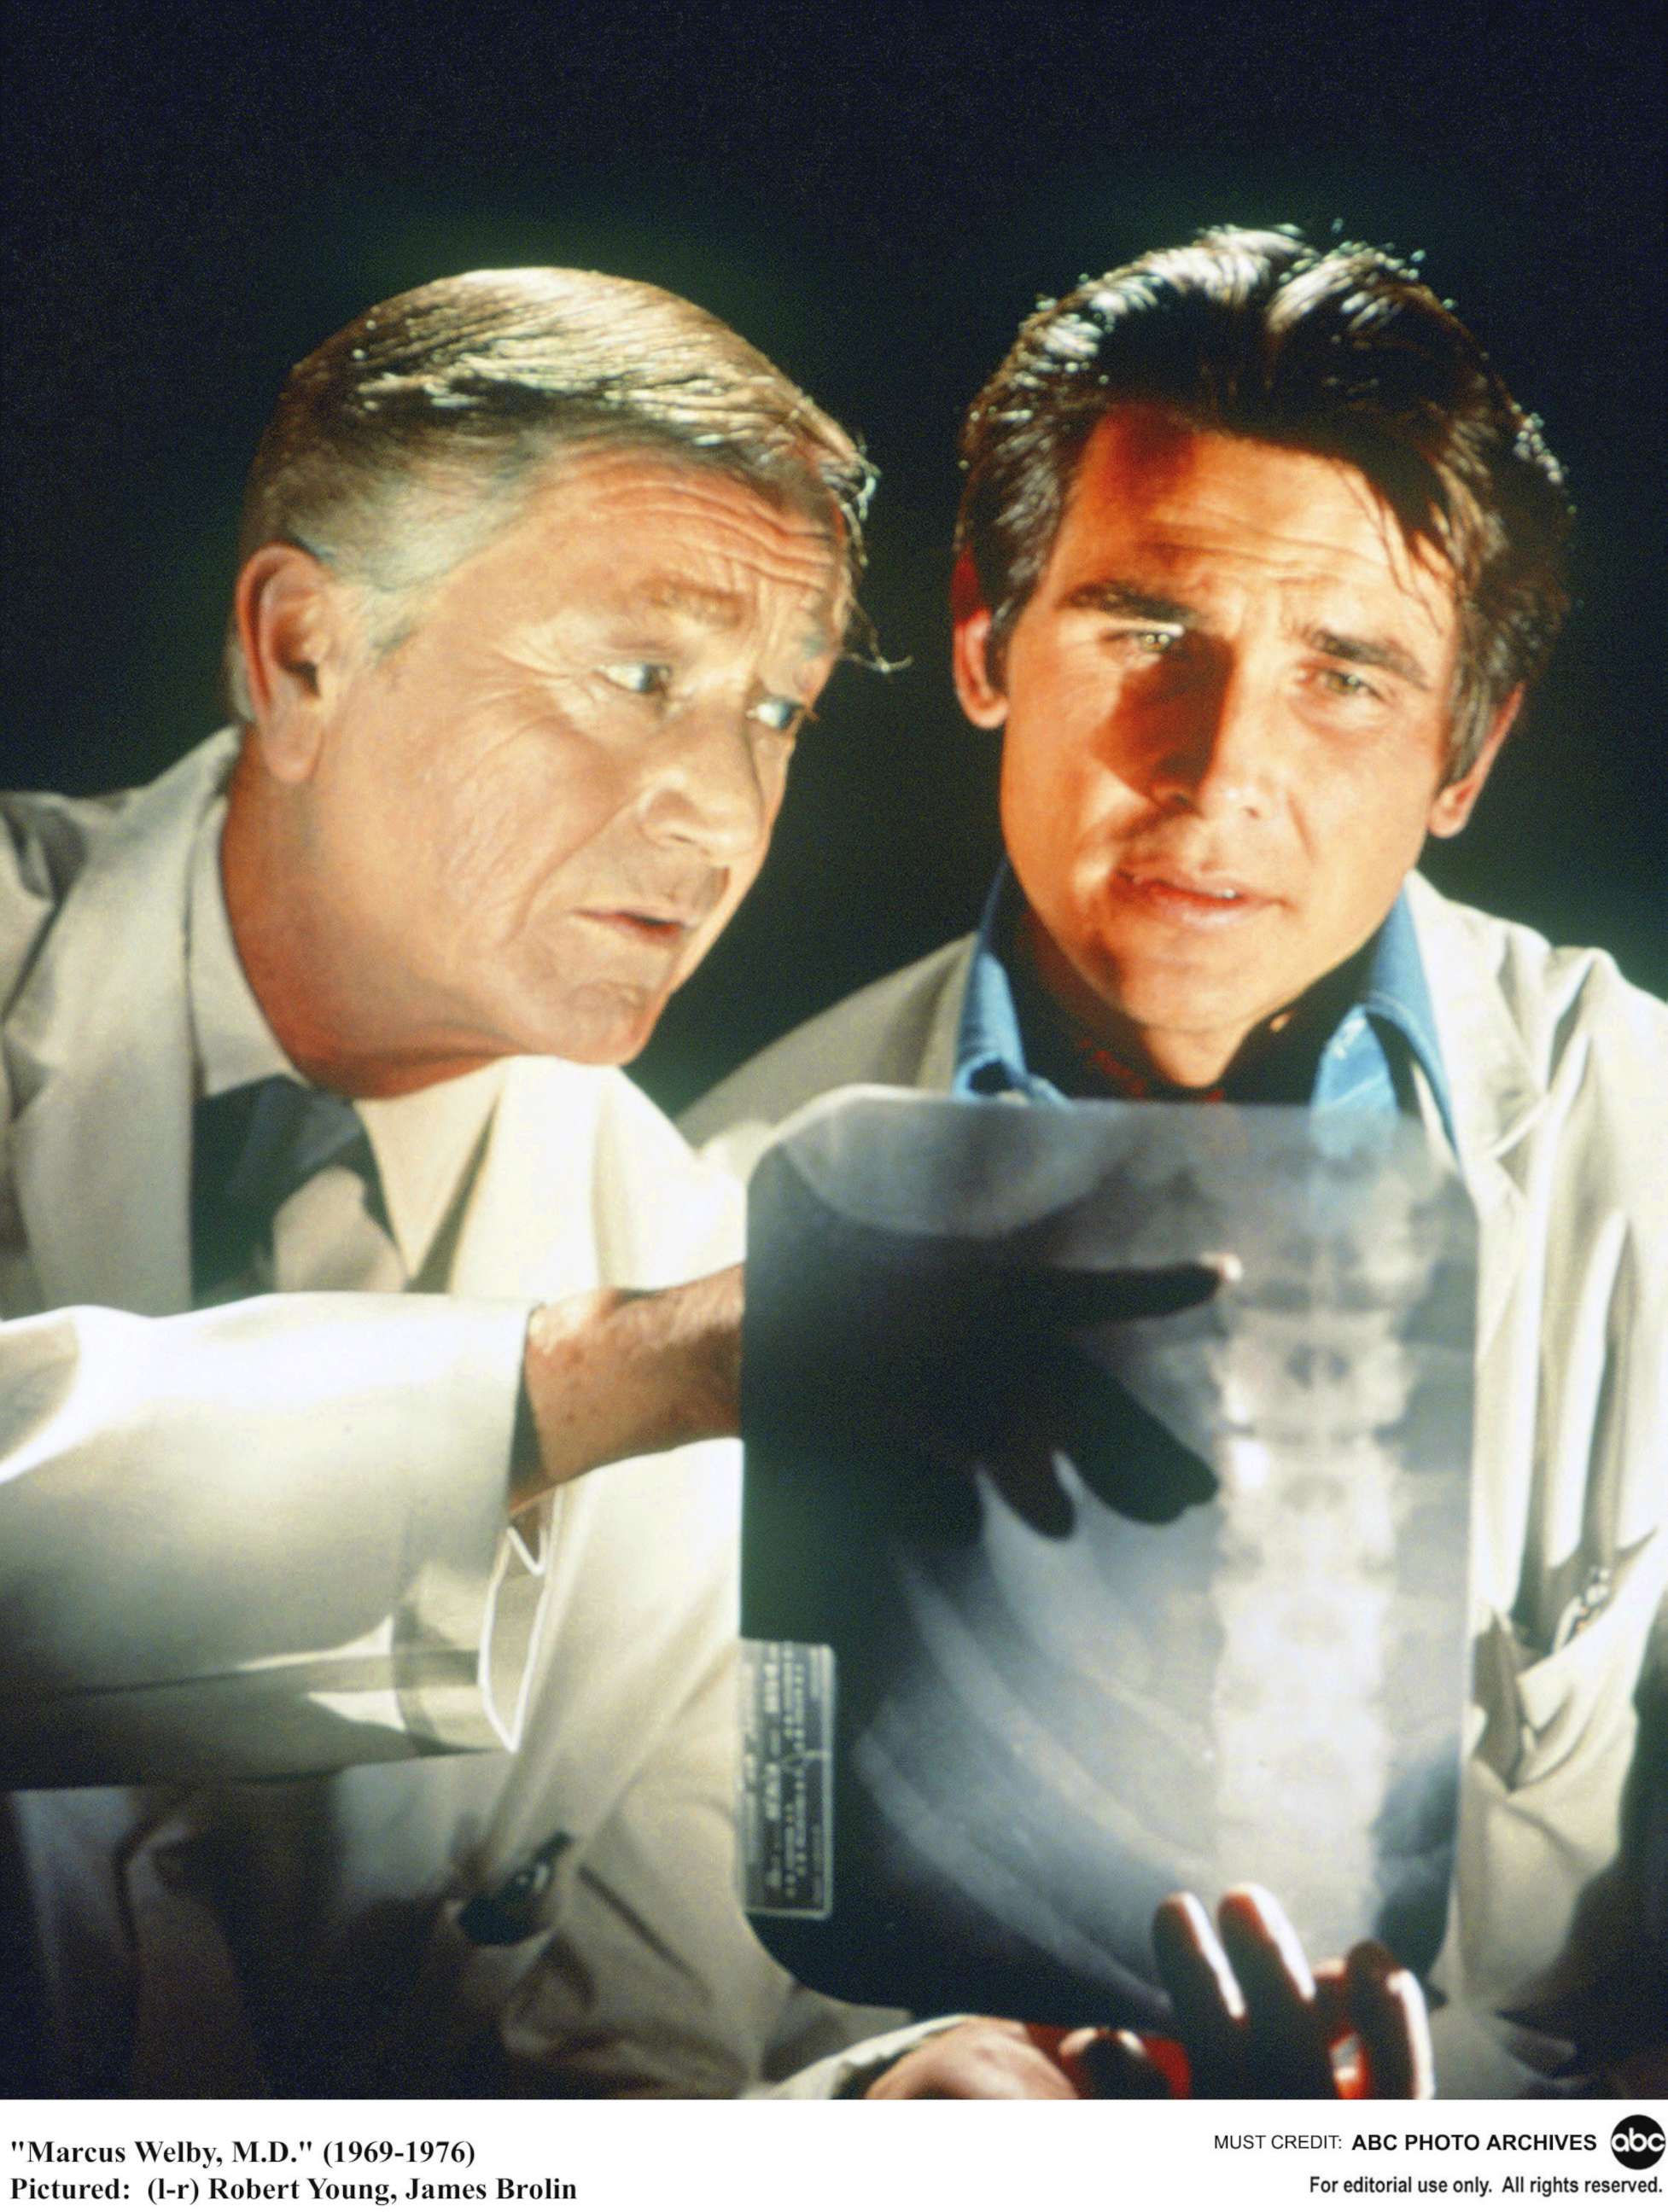 PHOTO: Robert Young and James Brolin are pictured in an image from "Marcus Welby, M.D.," circa 1971.